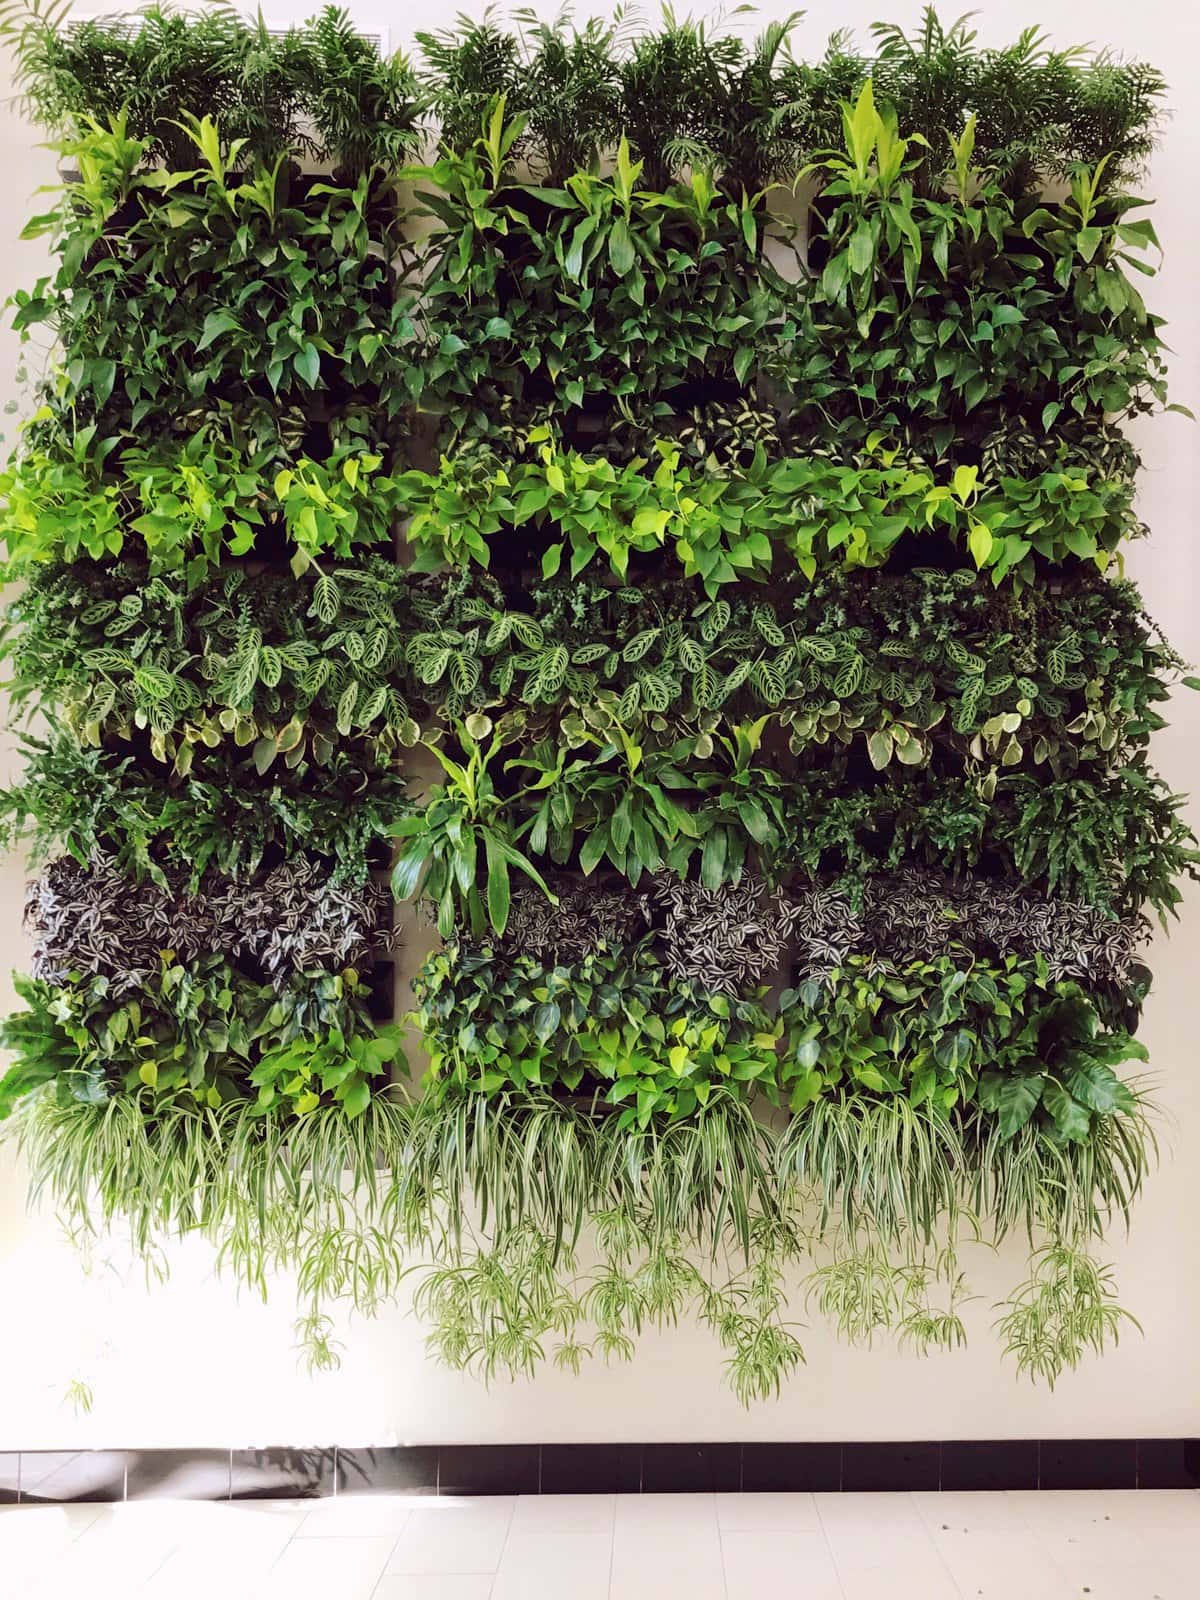 Indoor plants decorating: Several shades of living green plants on a wall